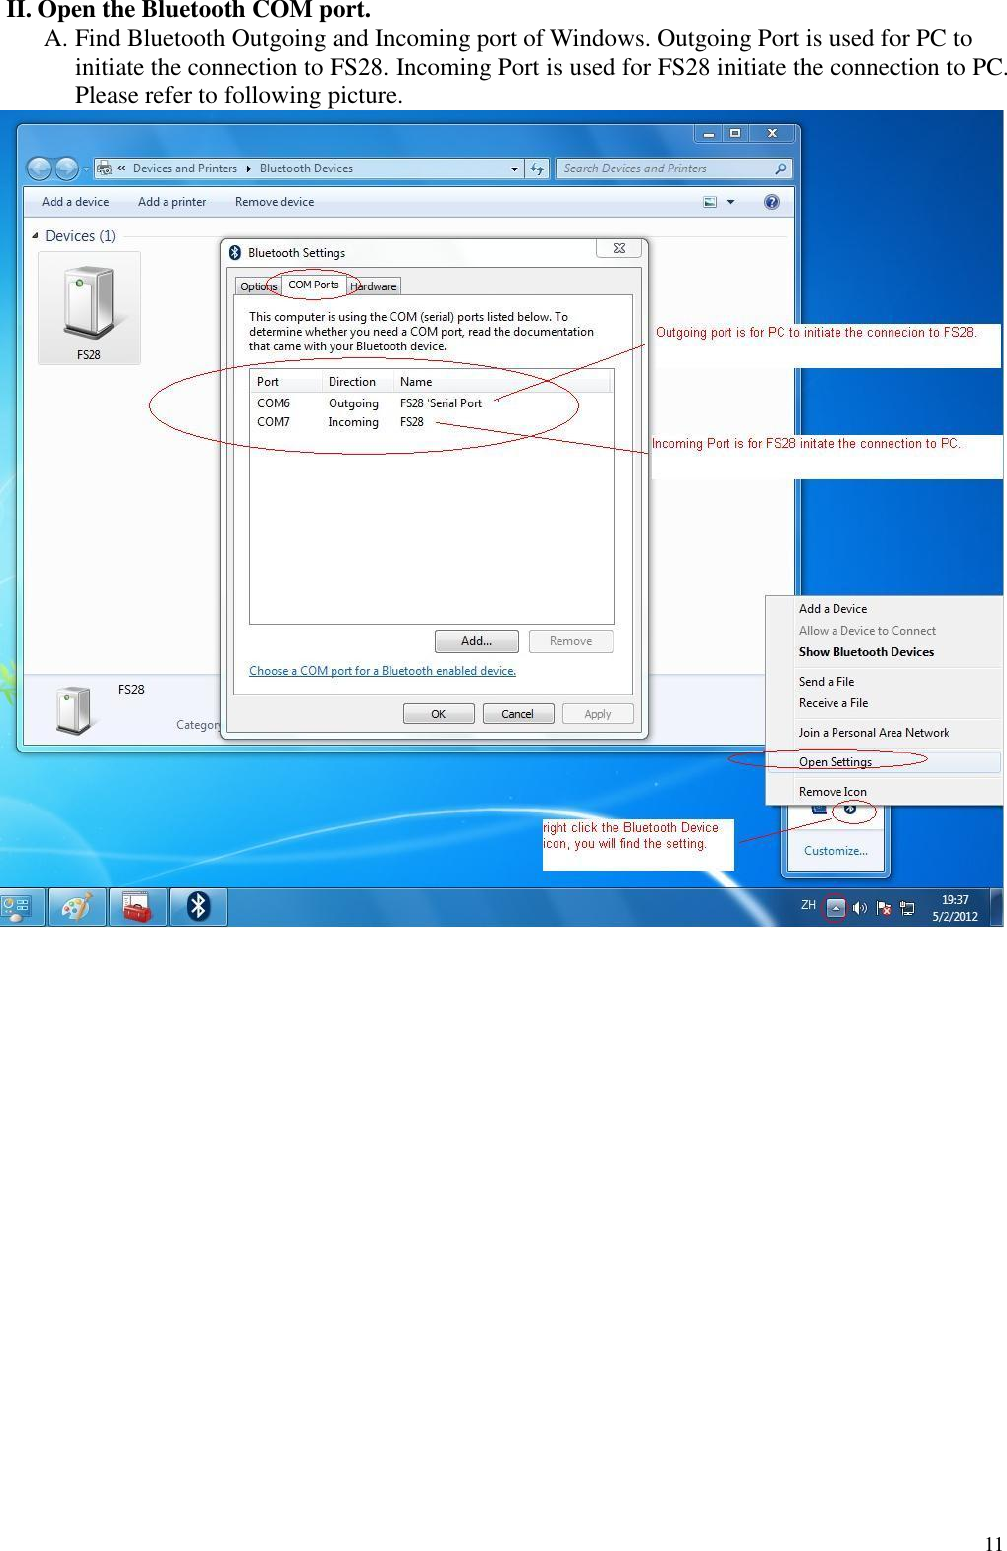  11  II. Open the Bluetooth COM port.  A. Find Bluetooth Outgoing and Incoming port of Windows. Outgoing Port is used for PC to initiate the connection to FS28. Incoming Port is used for FS28 initiate the connection to PC. Please refer to following picture.                     